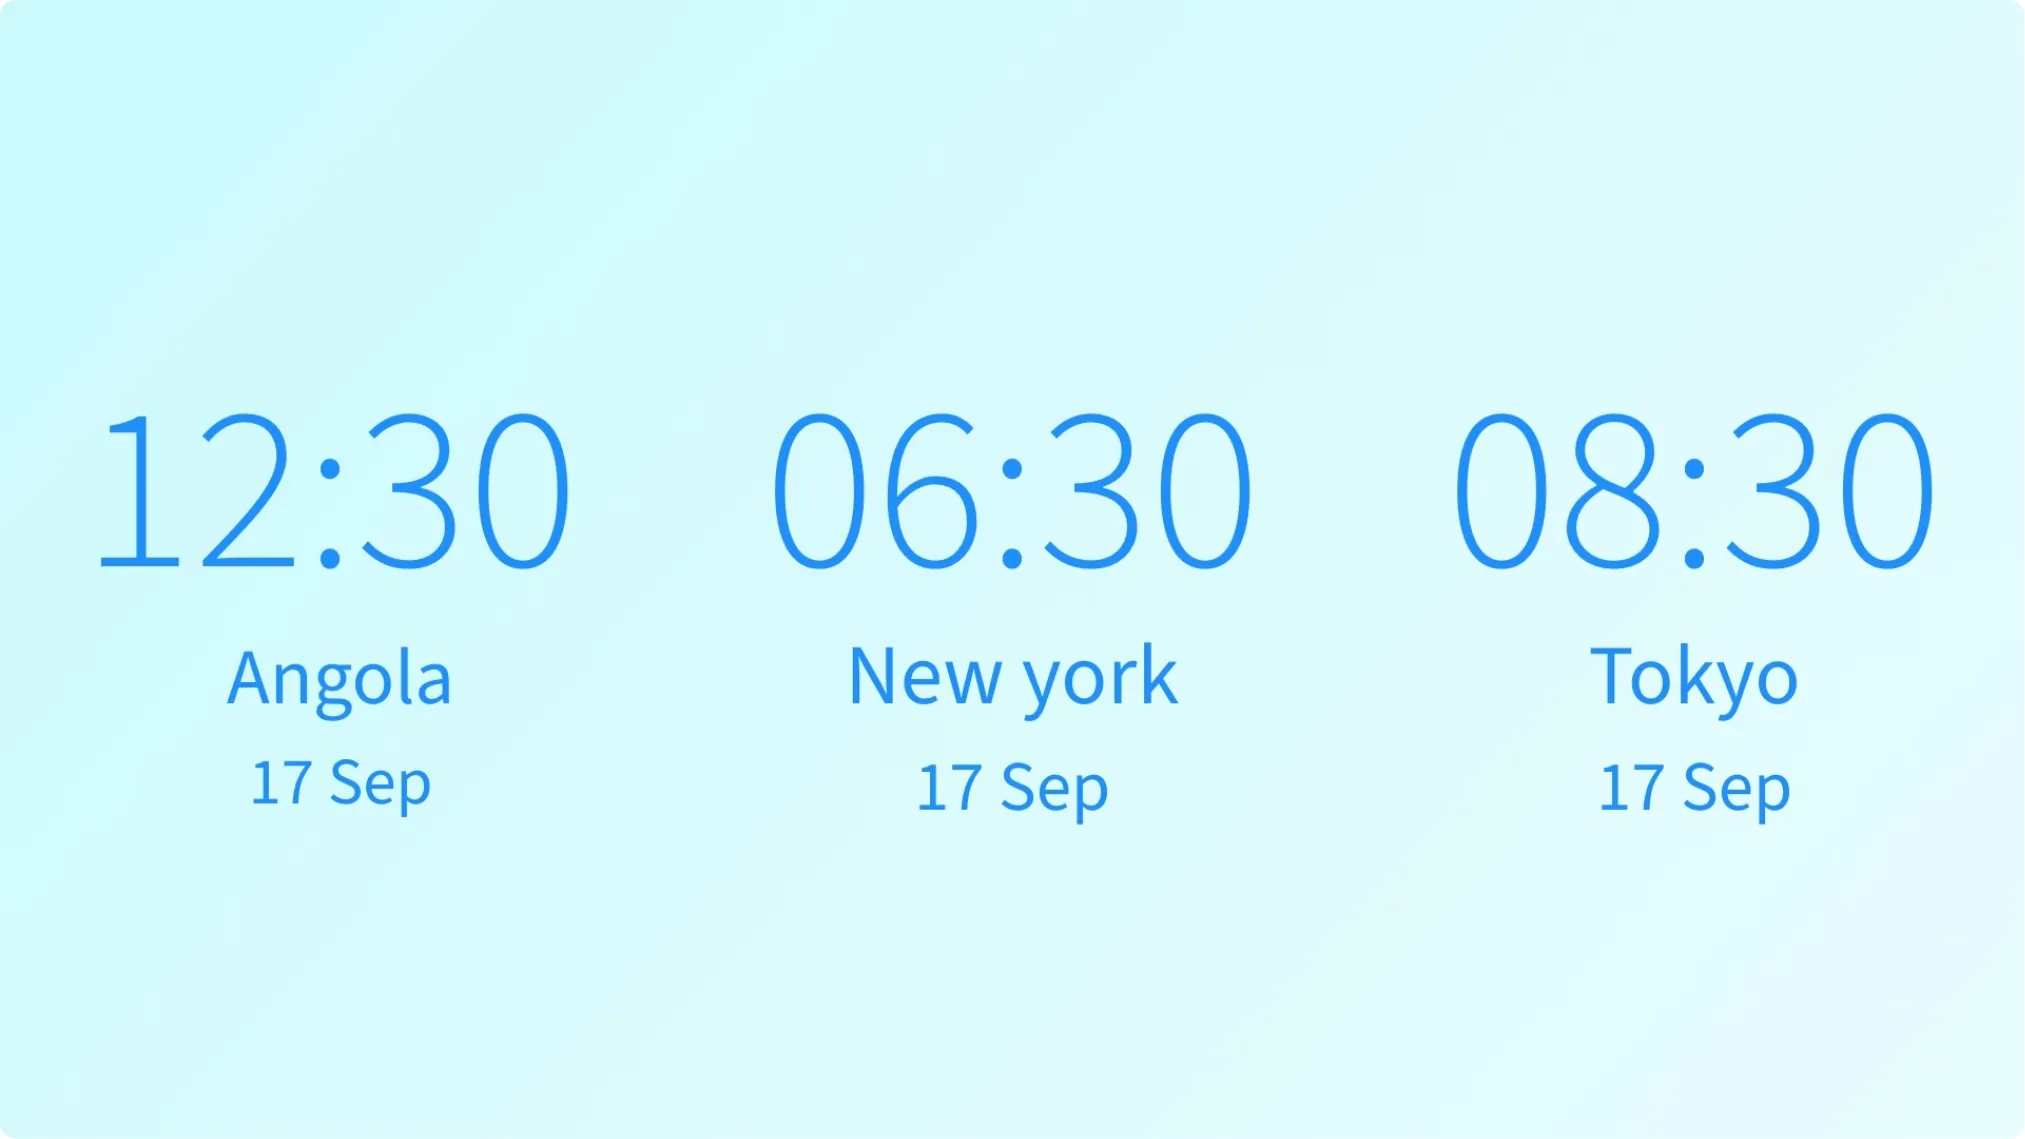 Clock app layout preview showing blue gradient as background, digital clock format and3 countires Angola, New York and Tokyo.